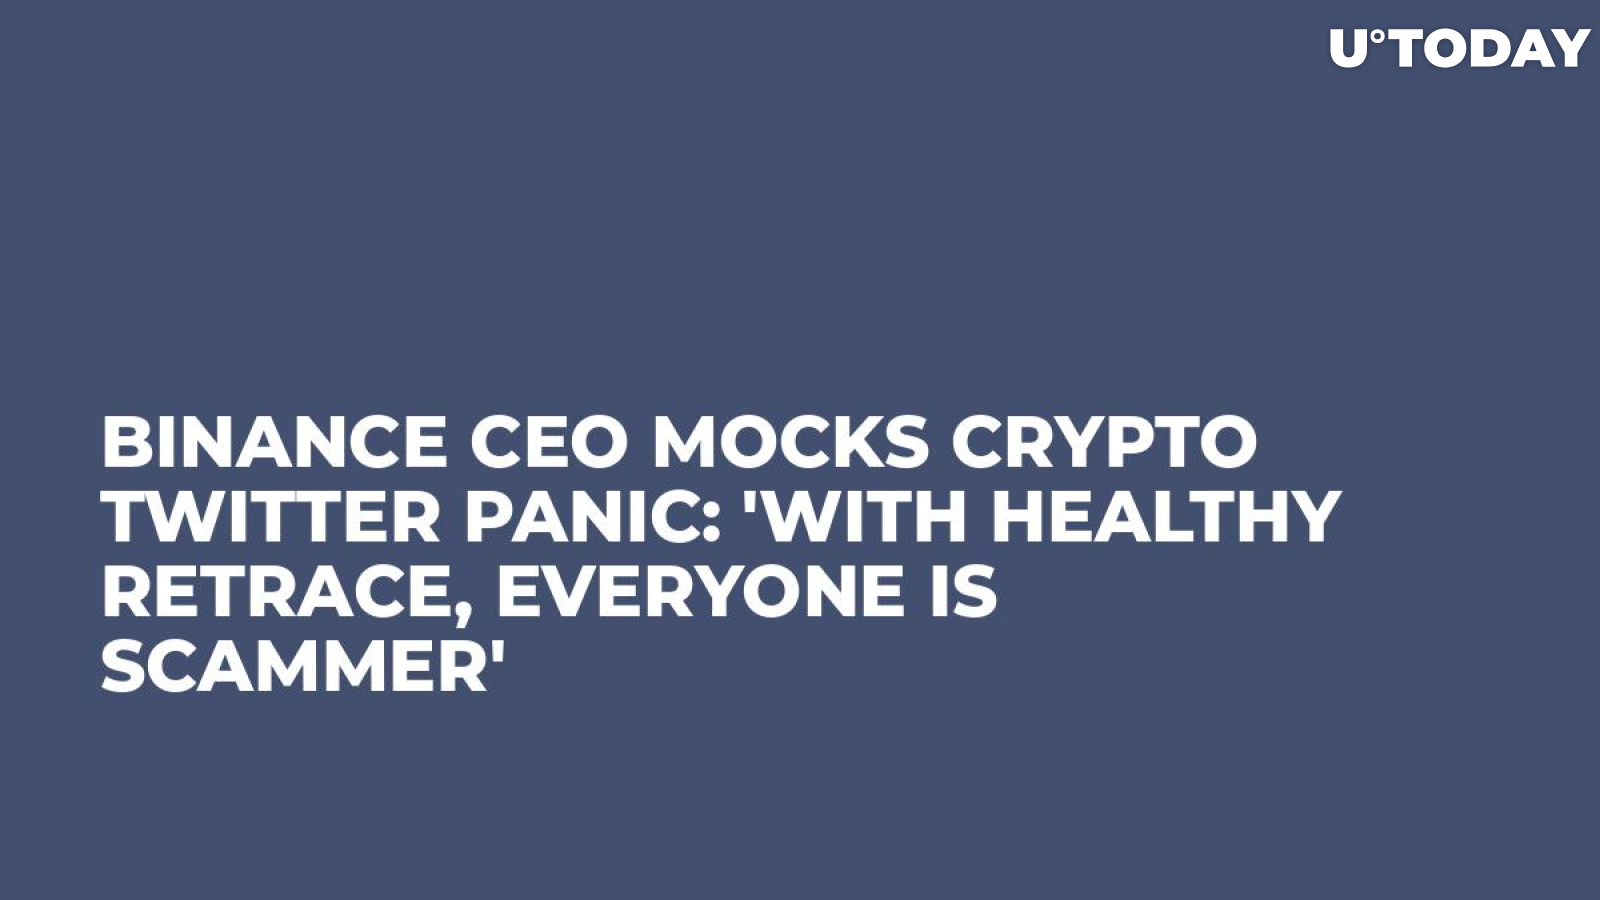 Binance CEO Mocks Crypto Twitter Panic: 'With Healthy Retrace, Everyone Is Scammer'